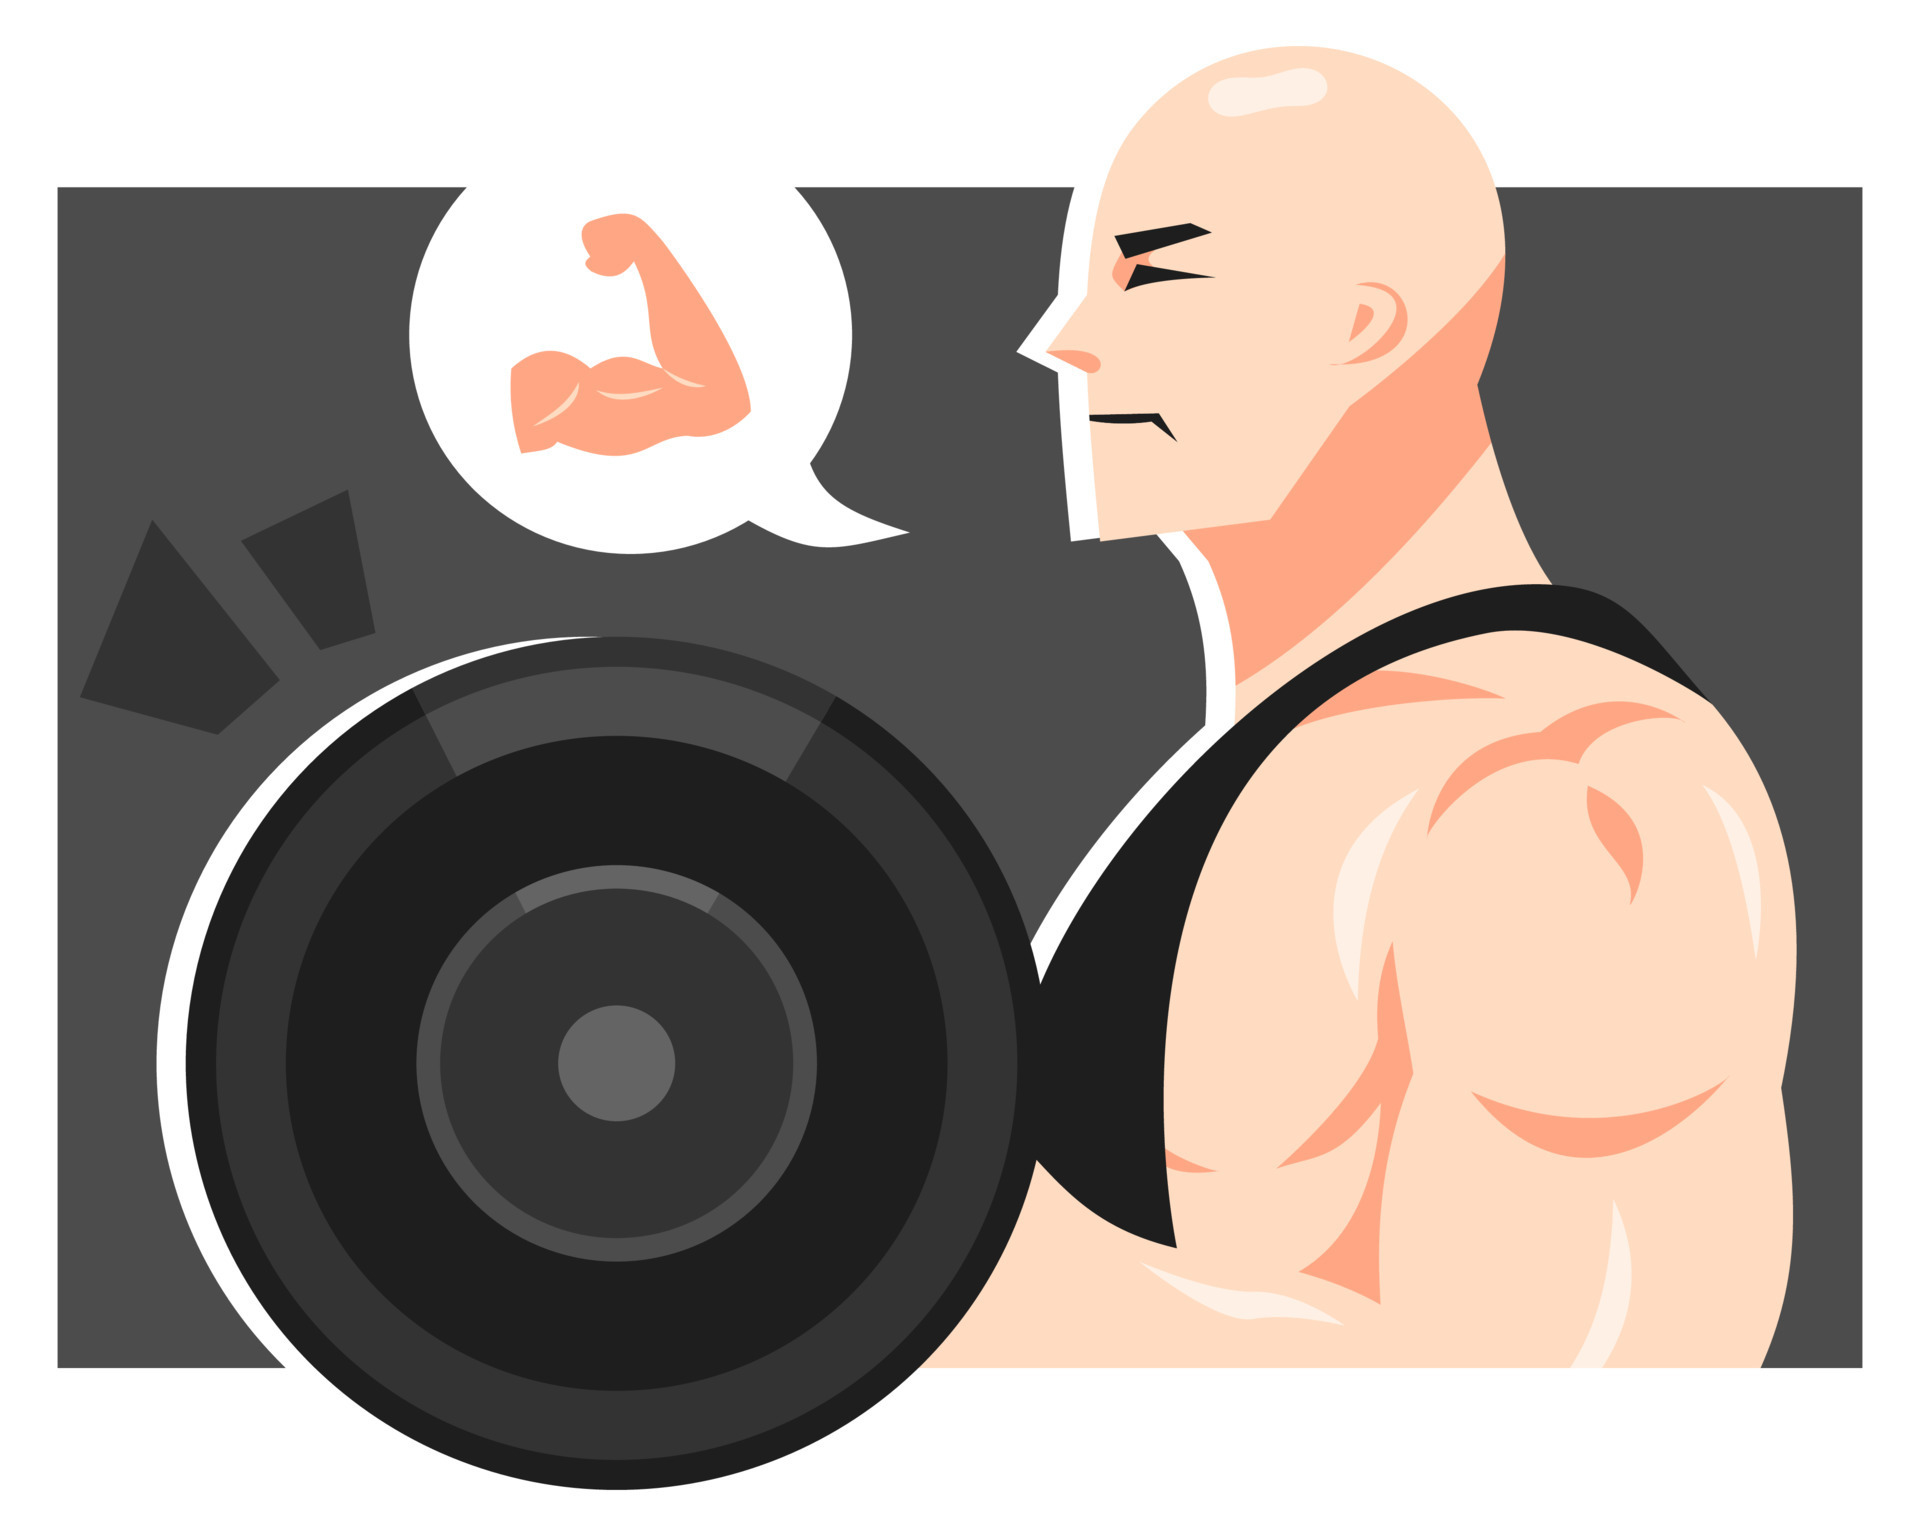 https://static.vecteezy.com/system/resources/previews/017/722/892/original/illustration-of-a-bald-headed-man-lifting-a-big-barbell-burly-man-side-view-equipped-with-hand-muscle-icon-suitable-for-the-theme-of-gym-sports-health-body-building-etc-flat-vector.jpg